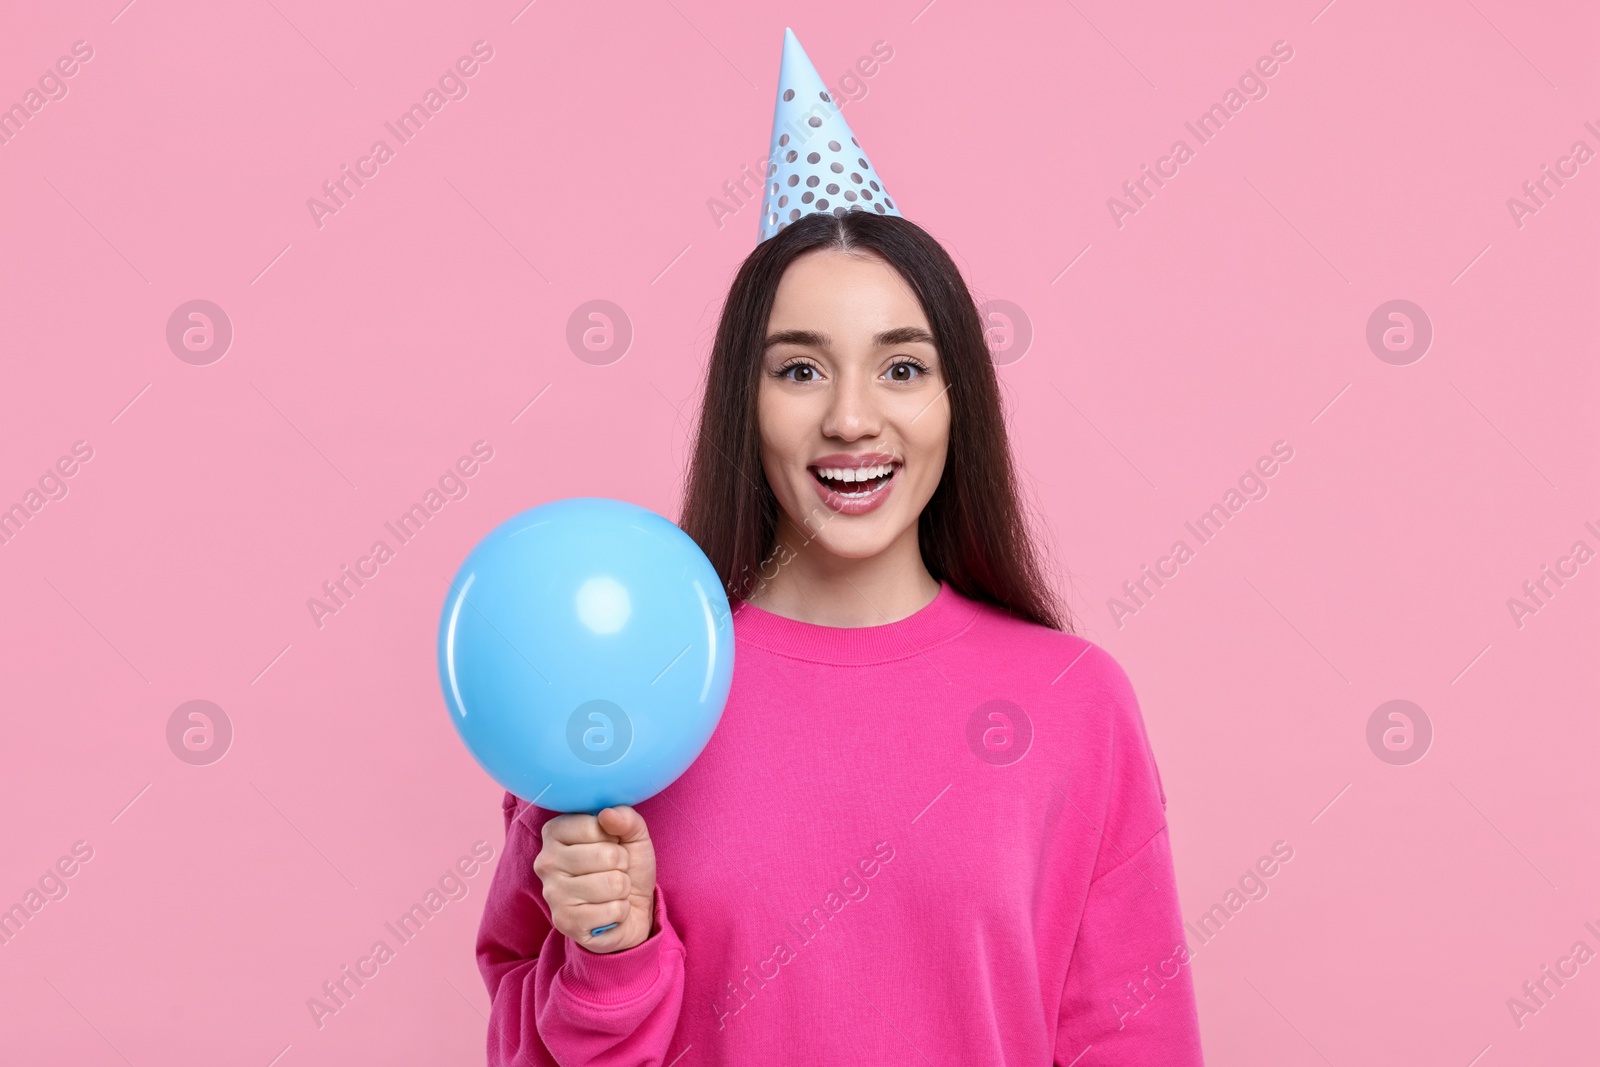 Photo of Happy woman in party hat with balloon on pink background